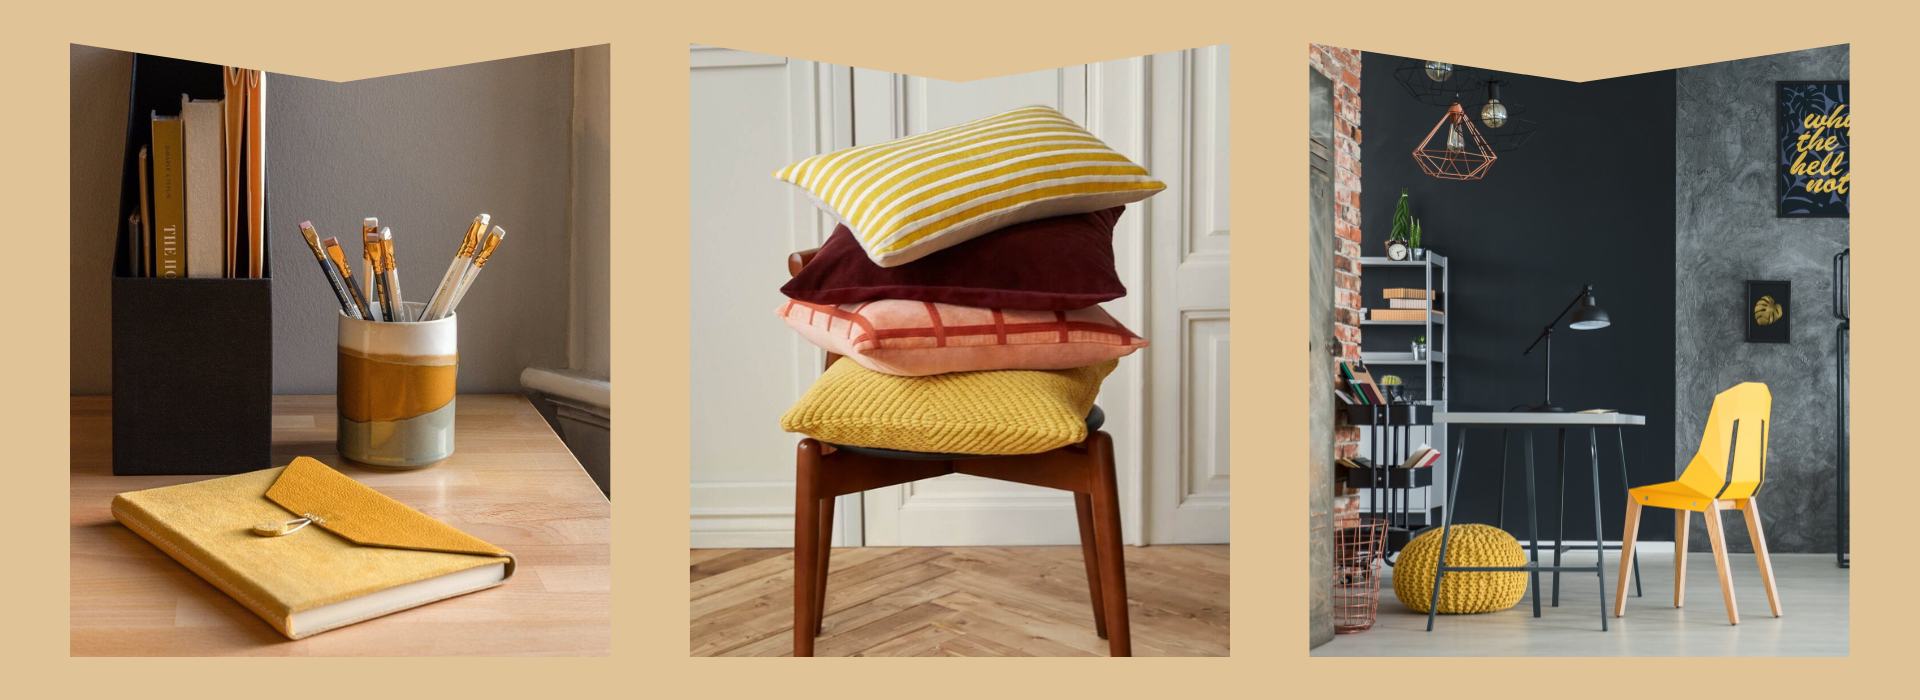 Stationary, Stack of Pillows, Dining Set